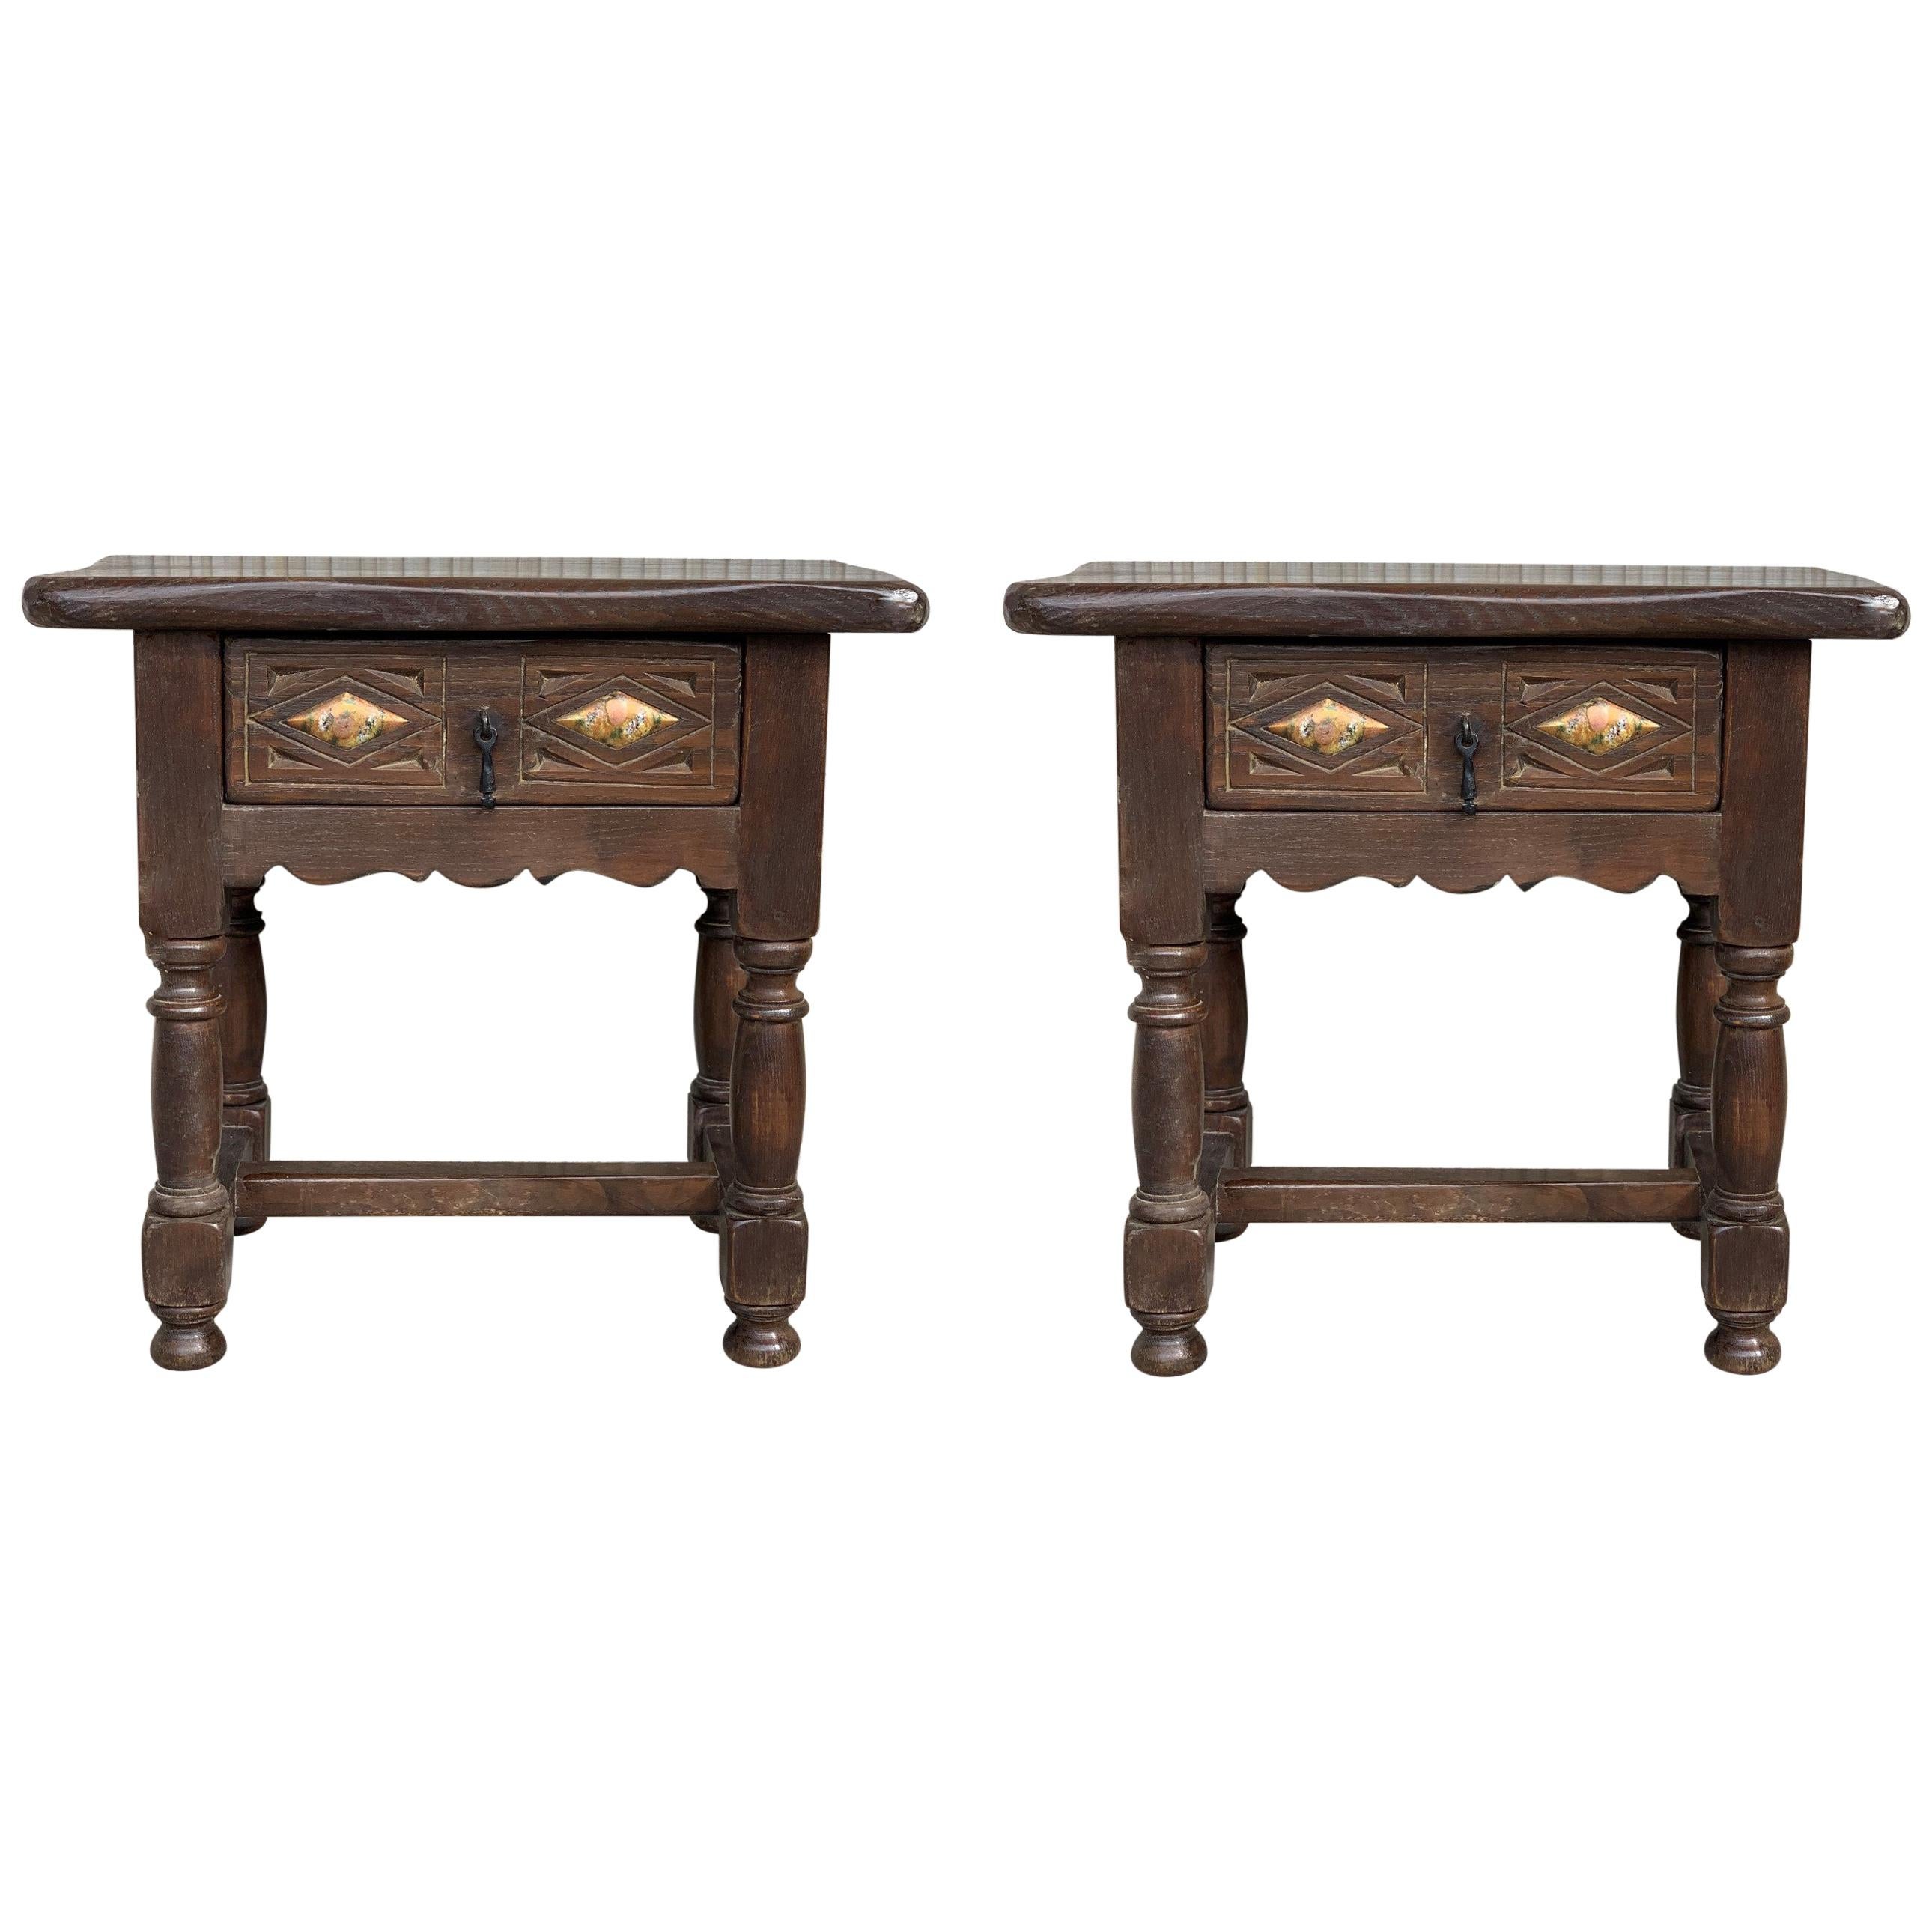 20th Century Pair of Spanish Nightstands with Drawer and Iron Hardware